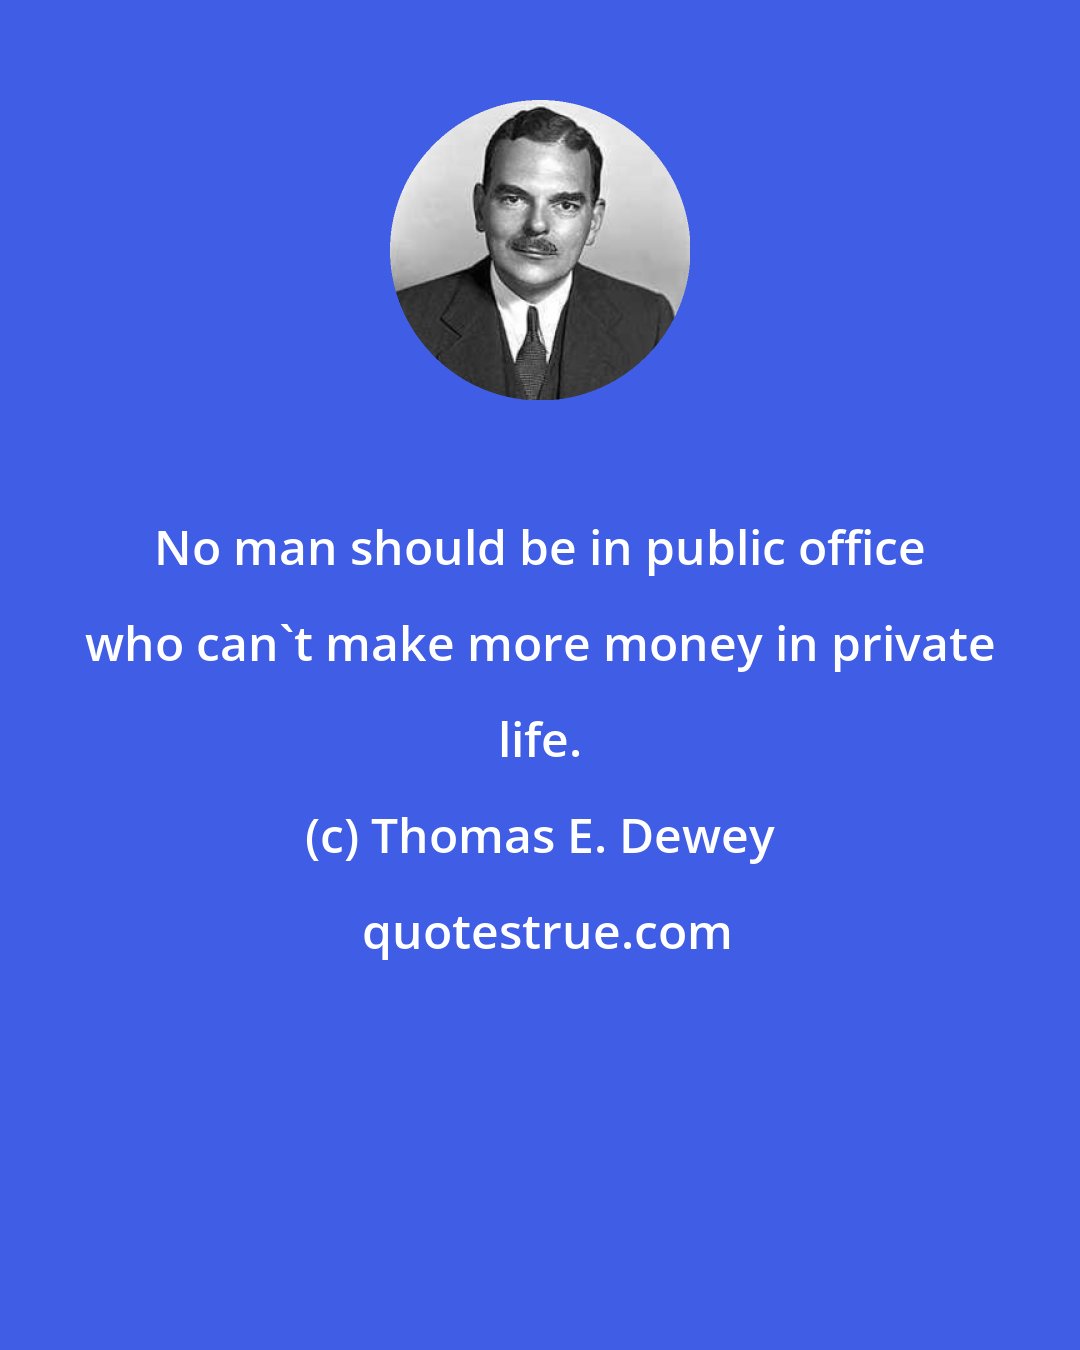 Thomas E. Dewey: No man should be in public office who can't make more money in private life.